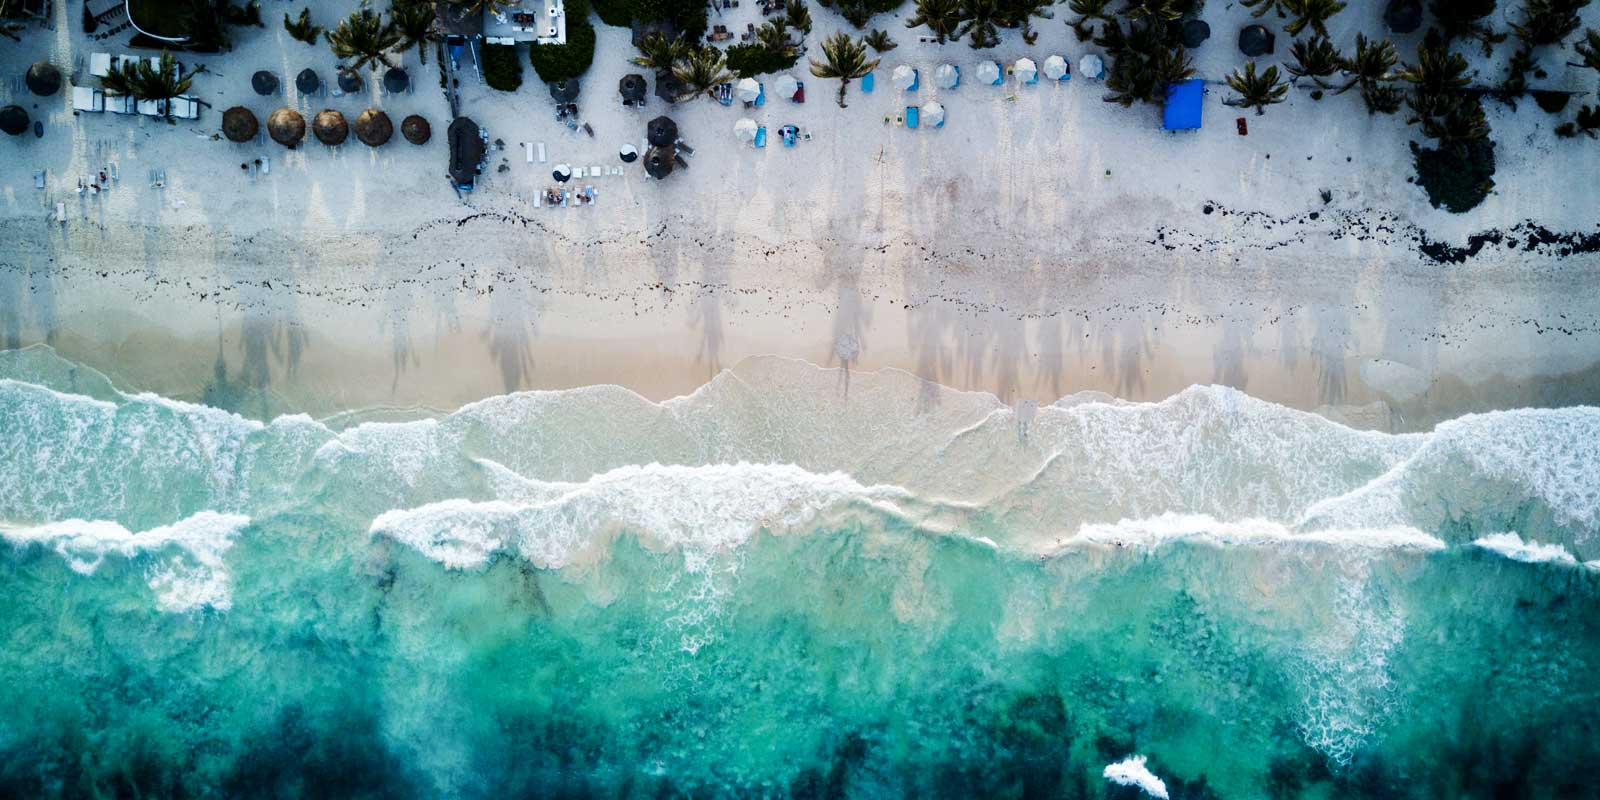 Get awesome aerial photos like this beach scene with a photography drone.